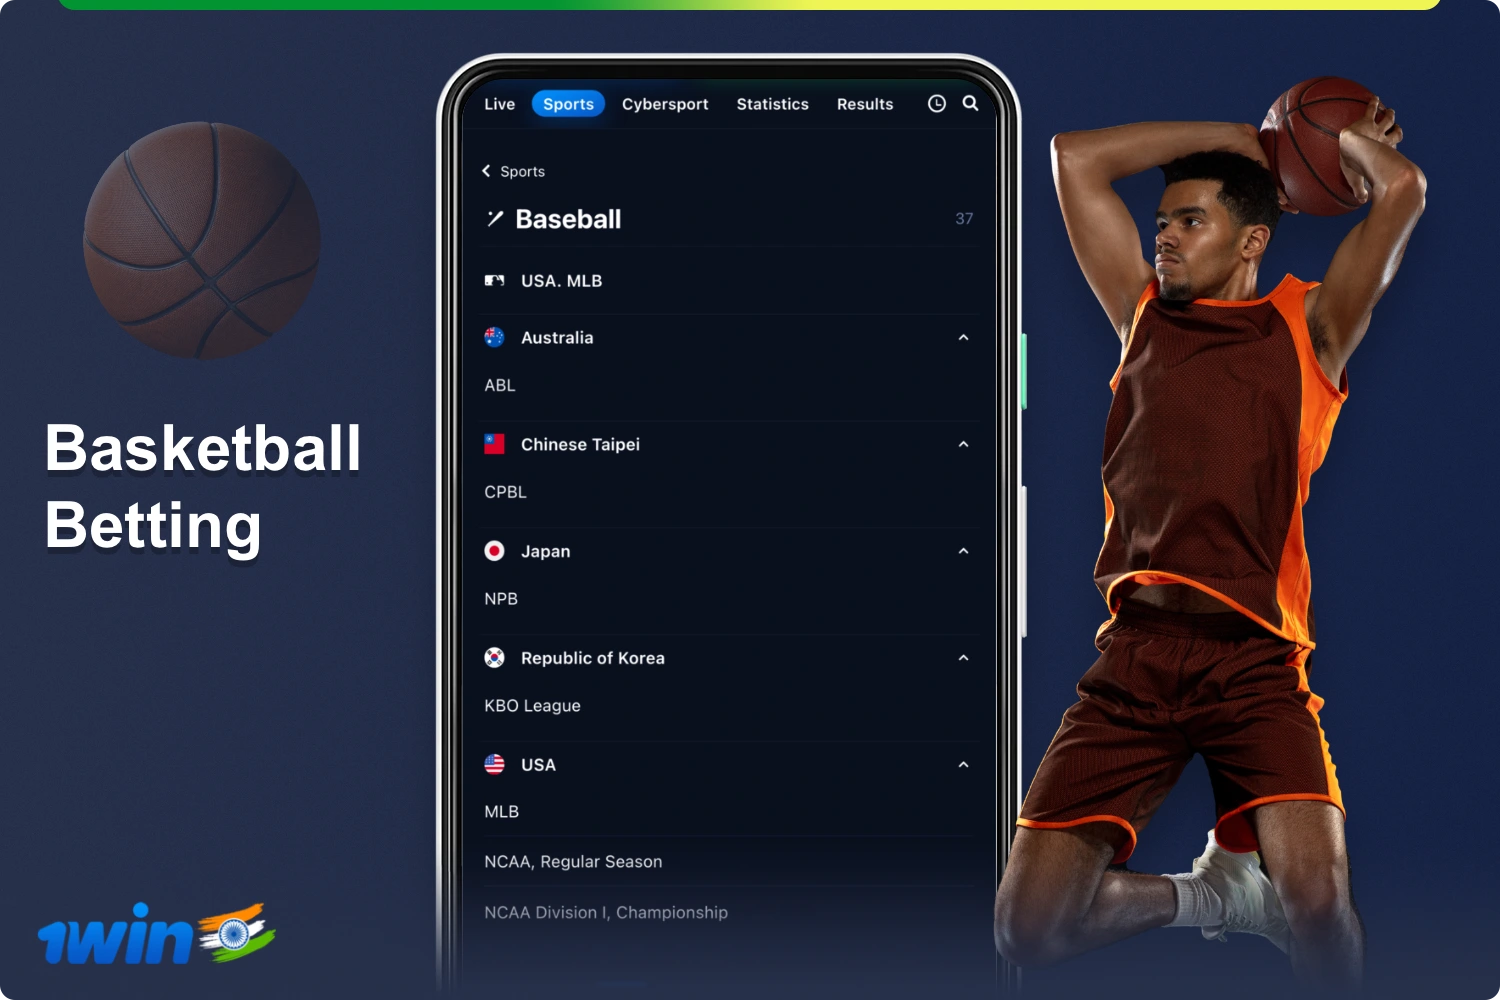 1win users from India can bet on basketball, as well as on popular tournaments